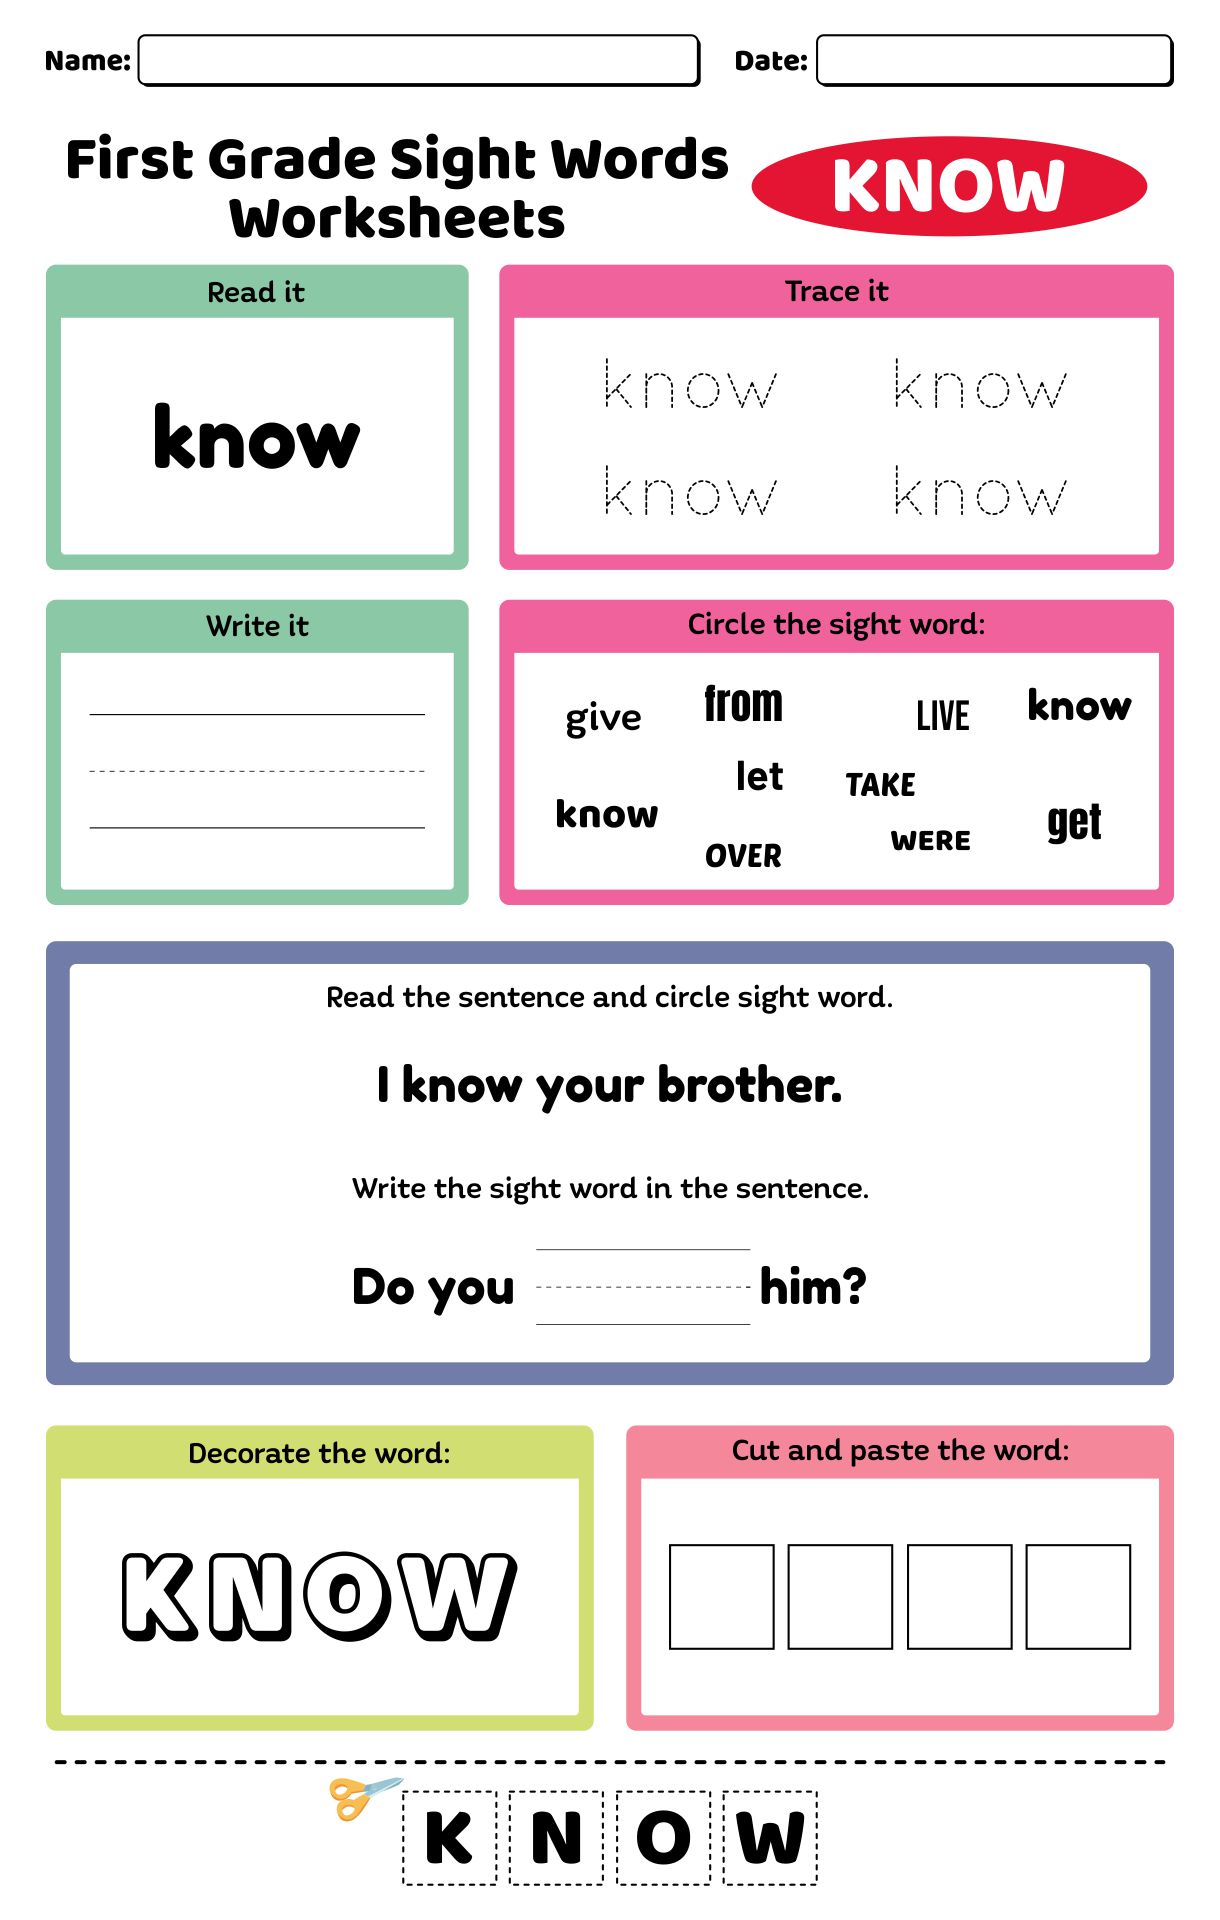 First Grade Sight Words Worksheets